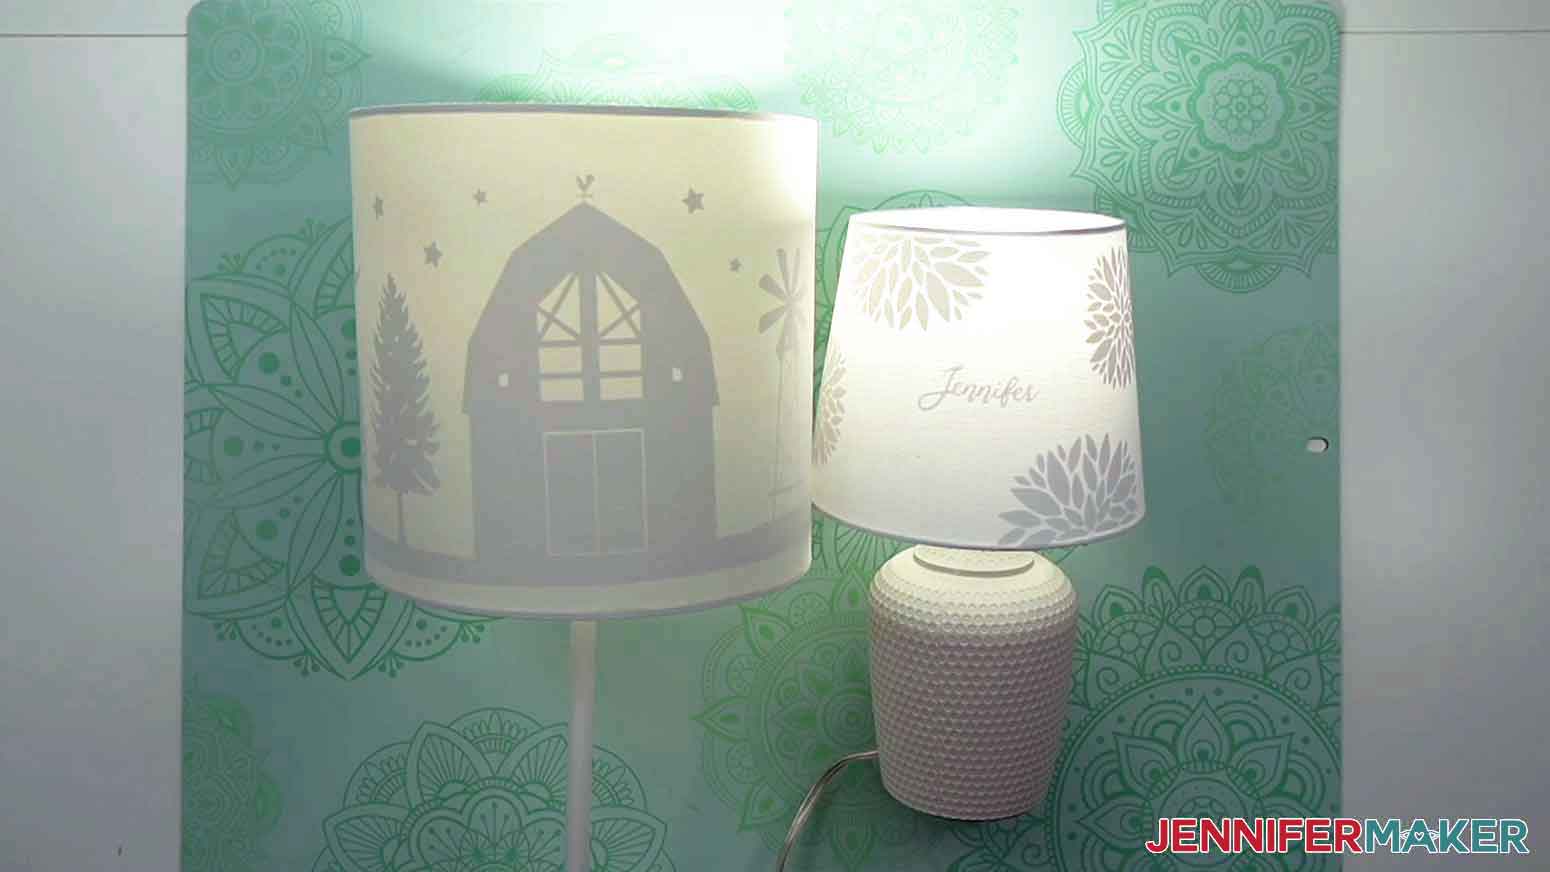 Final silhouette lampshade designs with a barn on a straight lampshade and a personalized dahlia design on a tapered lampshade.